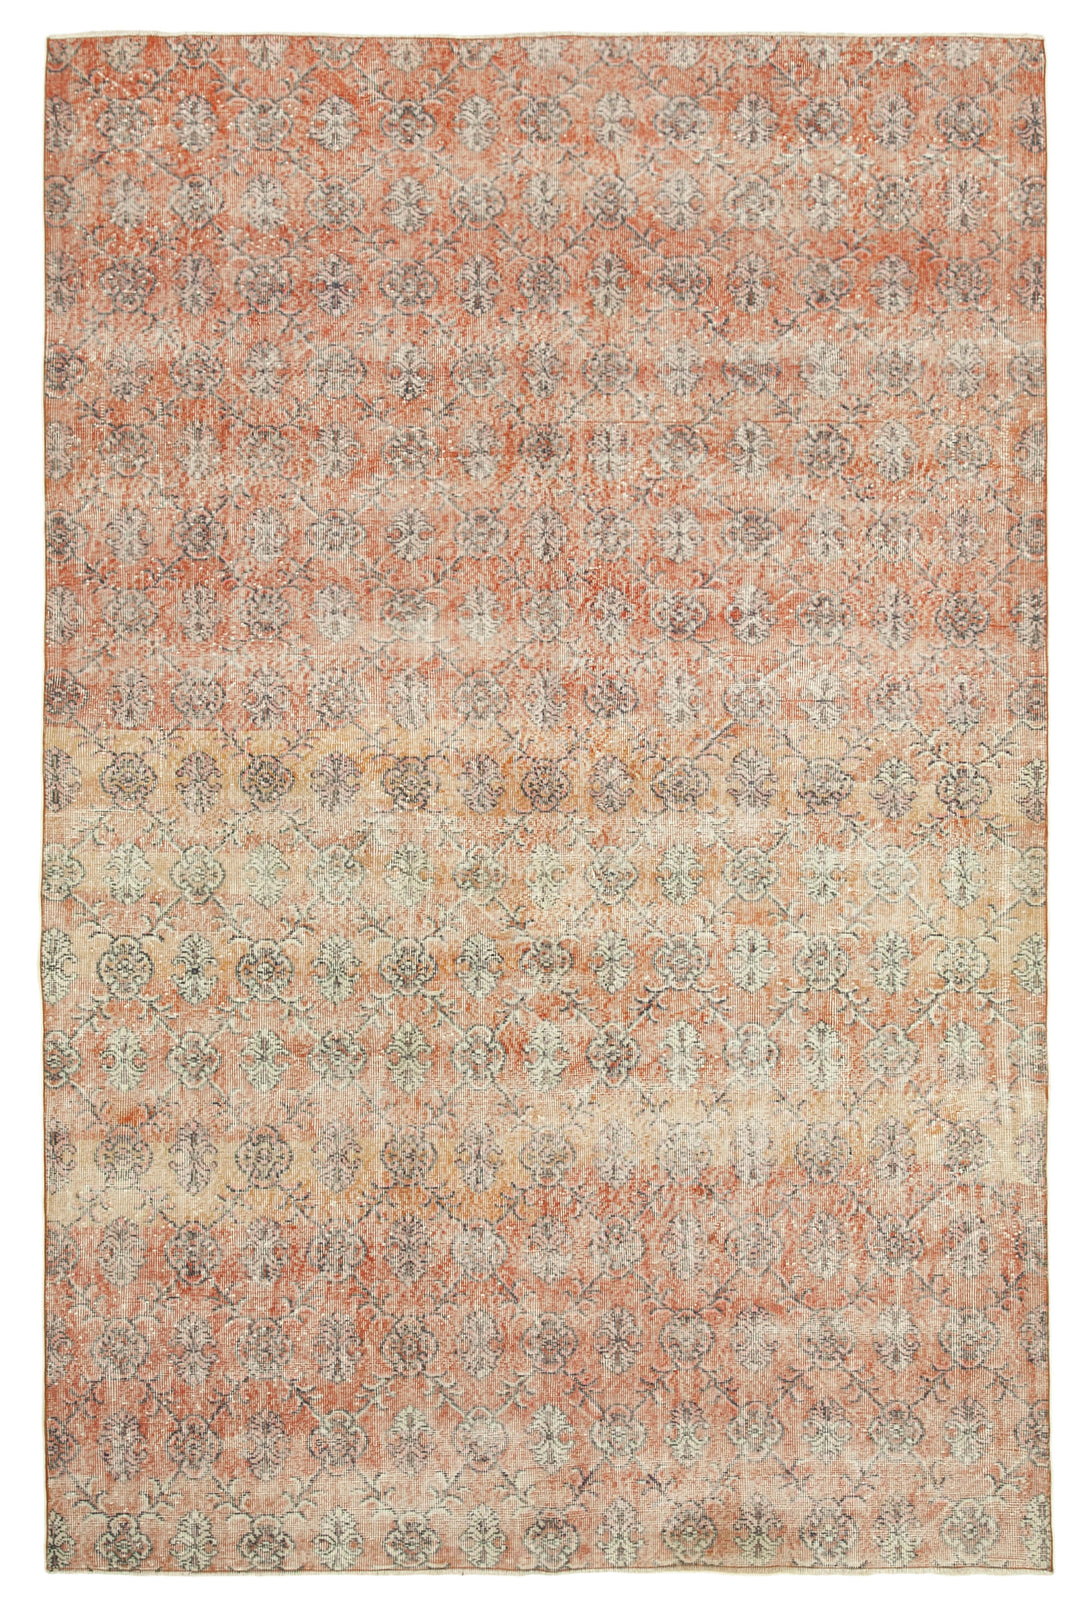 Handmade White Wash Area Rug > Design# OL-AC-38747 > Size: 7'-1" x 10'-10", Carpet Culture Rugs, Handmade Rugs, NYC Rugs, New Rugs, Shop Rugs, Rug Store, Outlet Rugs, SoHo Rugs, Rugs in USA